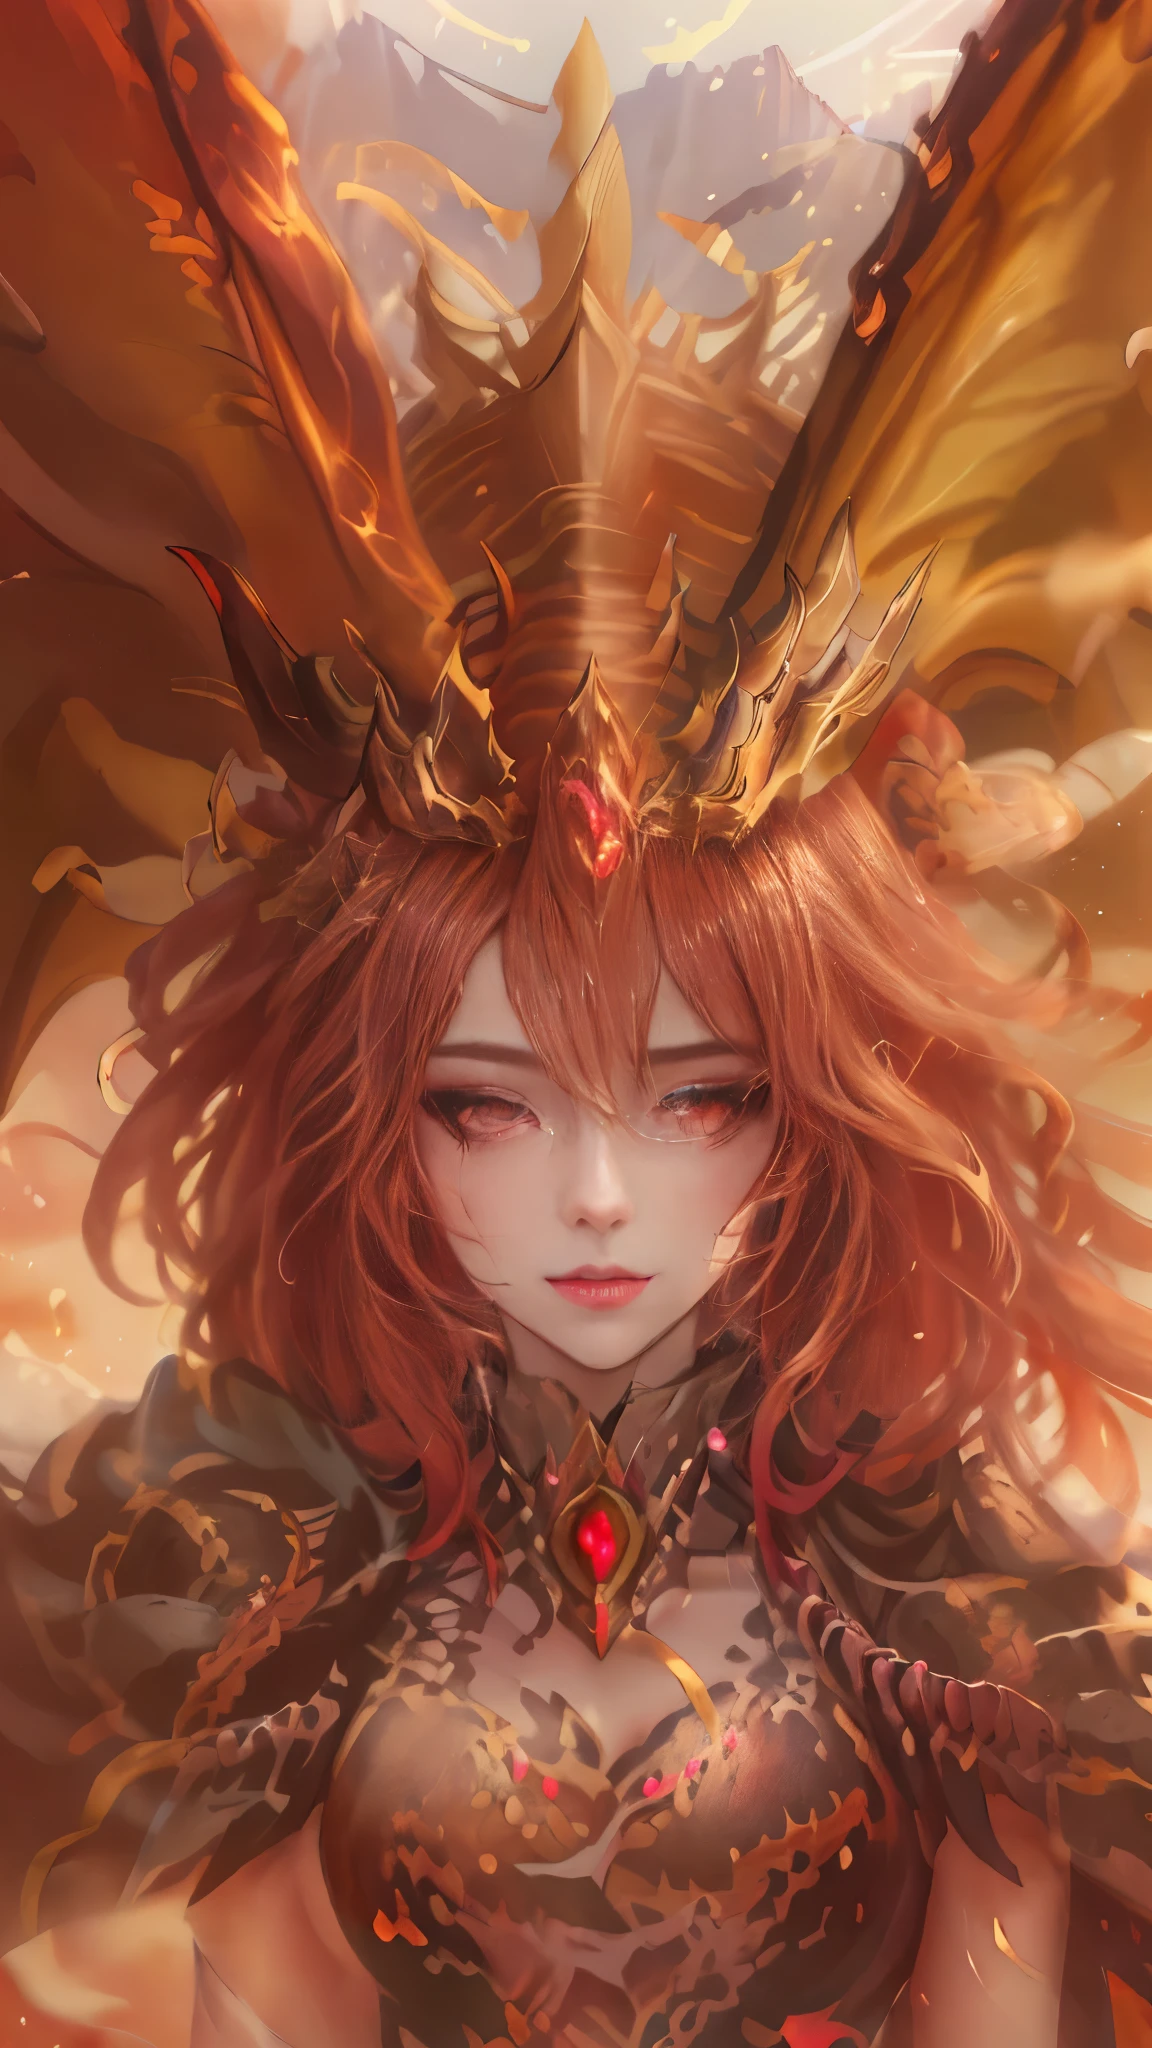 Anime girl with red hair and wings in desert environment, dragon girl, Dragon Queen, queen of dragons, dragon girl Portrait, by ヤン・J, beautiful succubus, detailed digital anime art, detailed anime art, anime fantasy illustration, epic fantasy art style, detailed anime artワーク, fusion of humans and dragons, anime fantasy artwork, background dragon, epic anime artwork